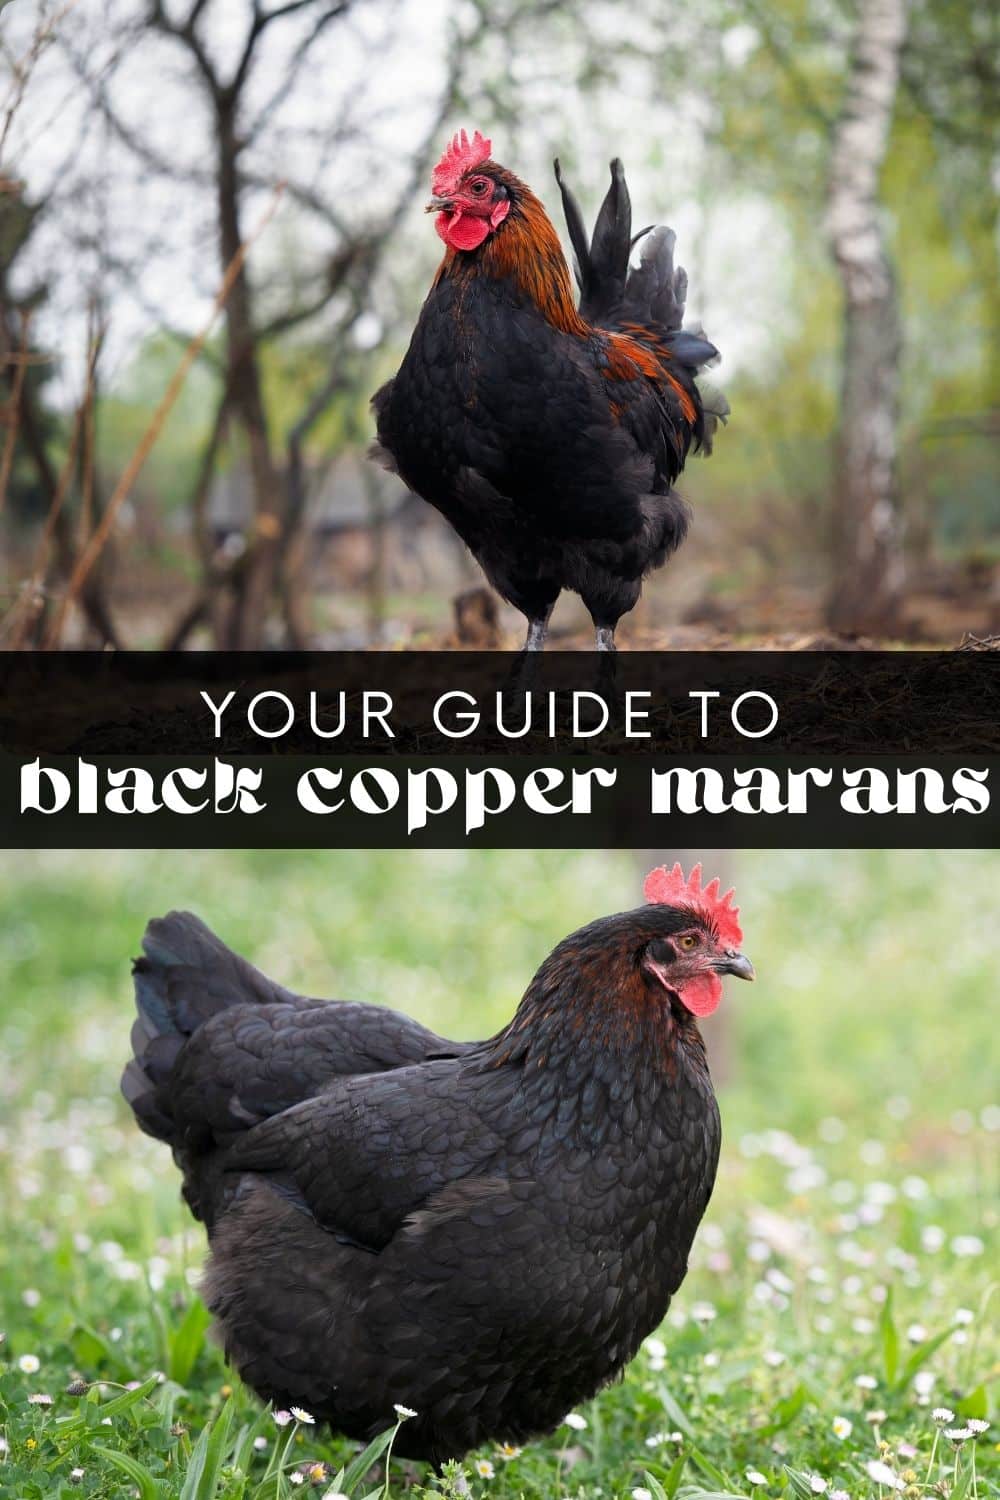 Are you looking for a gentle, friendly, easy-to-handle chicken breed for your backyard? Learn everything you need to know about Black Copper Marans, and get ready to add their beautiful, chocolate-colored eggs to your basket! 